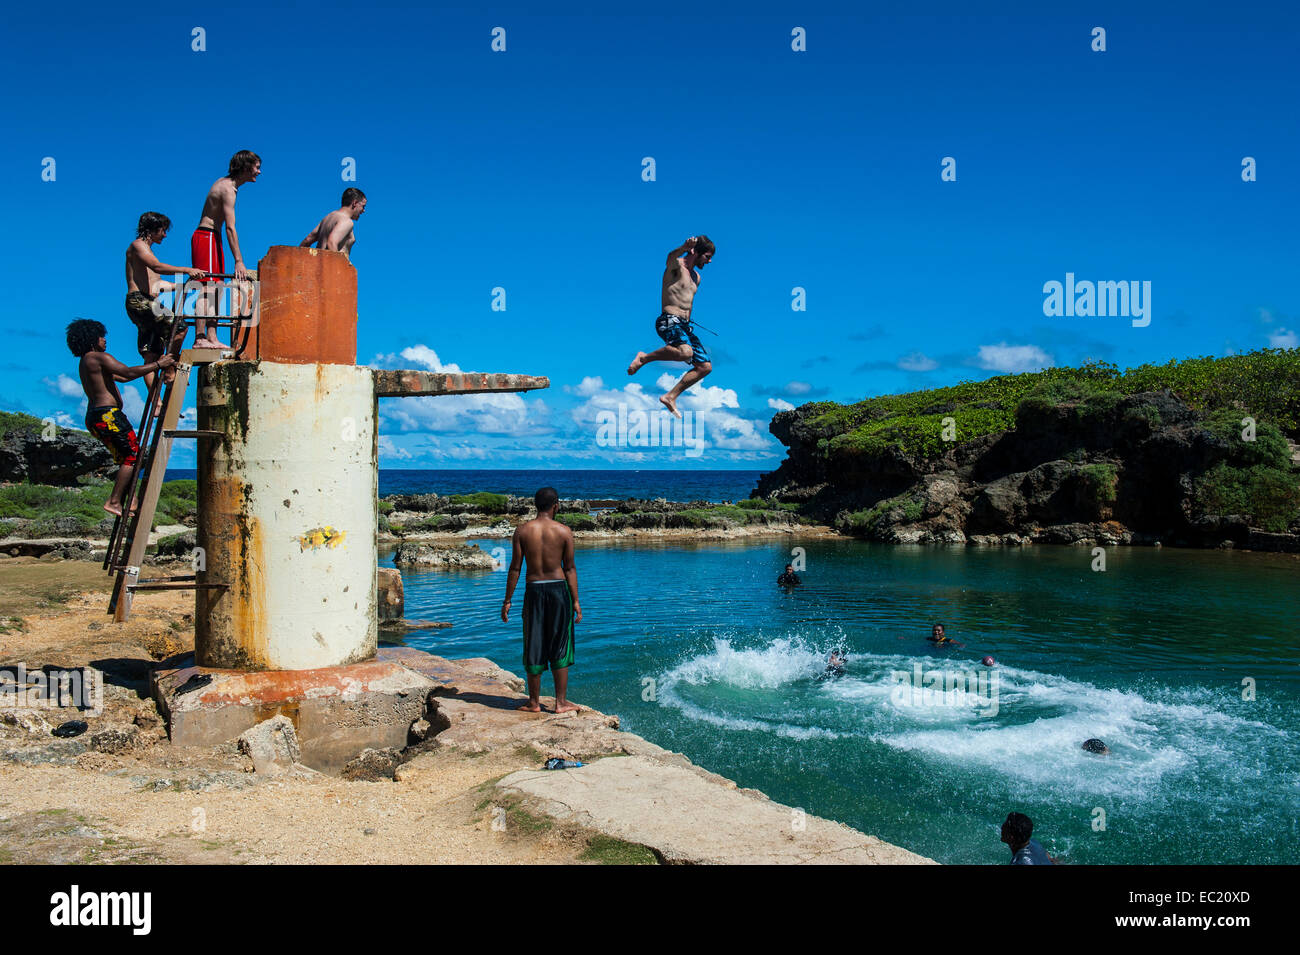 Local boys jumping and swimming in the Salugula Pool, Guam, US Territory, Pacific Stock Photo